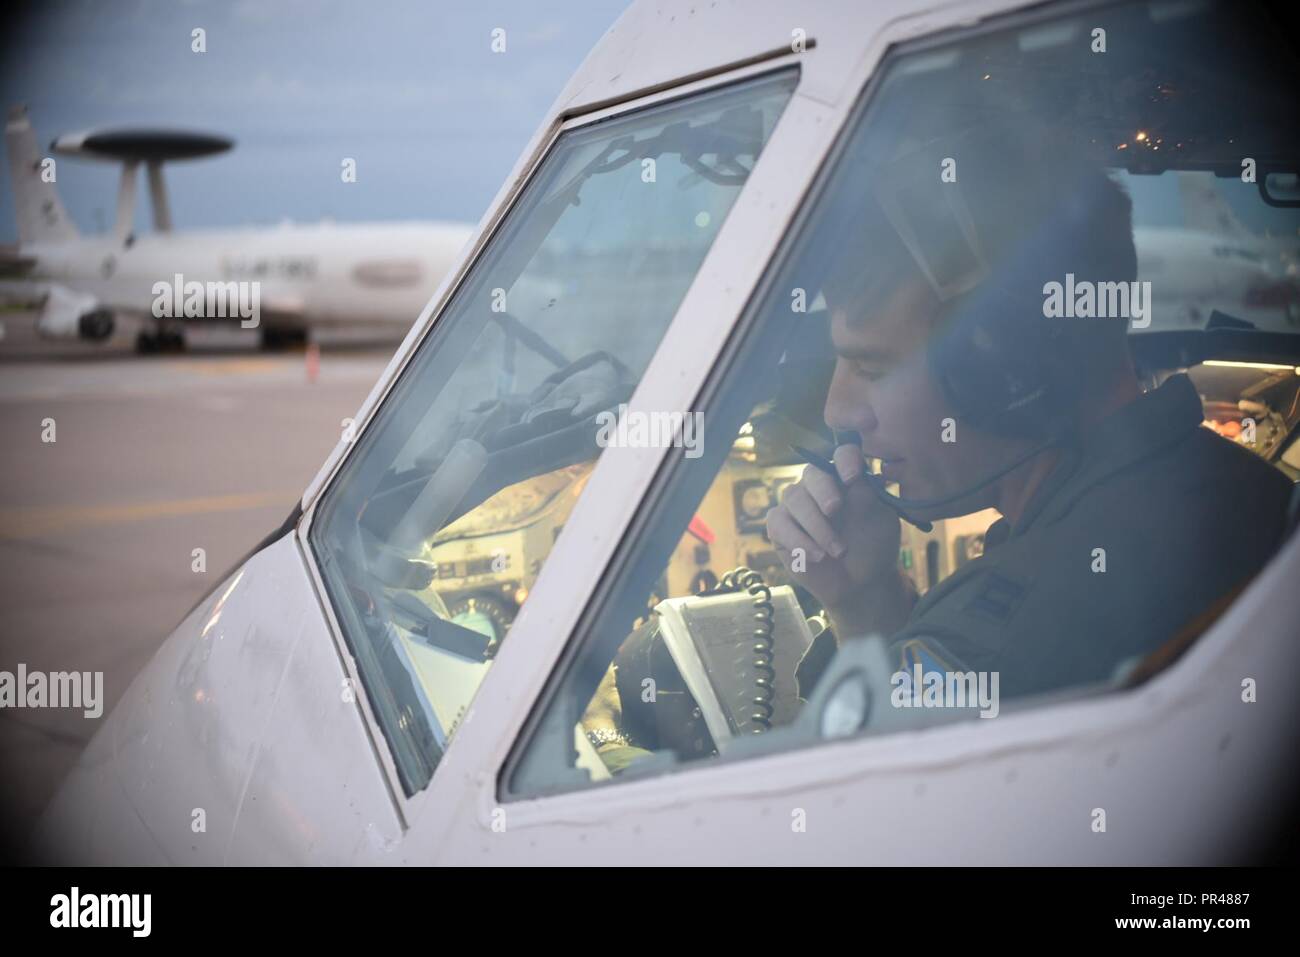 Capt. Josh Archer, an E-3G Airborne Warning and Control System pilot, reads back his clearance during pre-flight operations in the early morning of Sept. 15, 2018 at Tinker Air Force Base, Oklahoma. Capt. Archer and his crew are from the 552nd Air Control Wing, 960th Airborne Air Control Squadron, based at Tinker AFB and are shown preparing for a mission supporting the response to Hurricane Florence Sept. 15, 2018, Tinker Air Force Base, Oklahoma.  The AWACS will provide air control and de-confliction service along the East Coast of the United States as they monitor and control airspace as loc Stock Photo